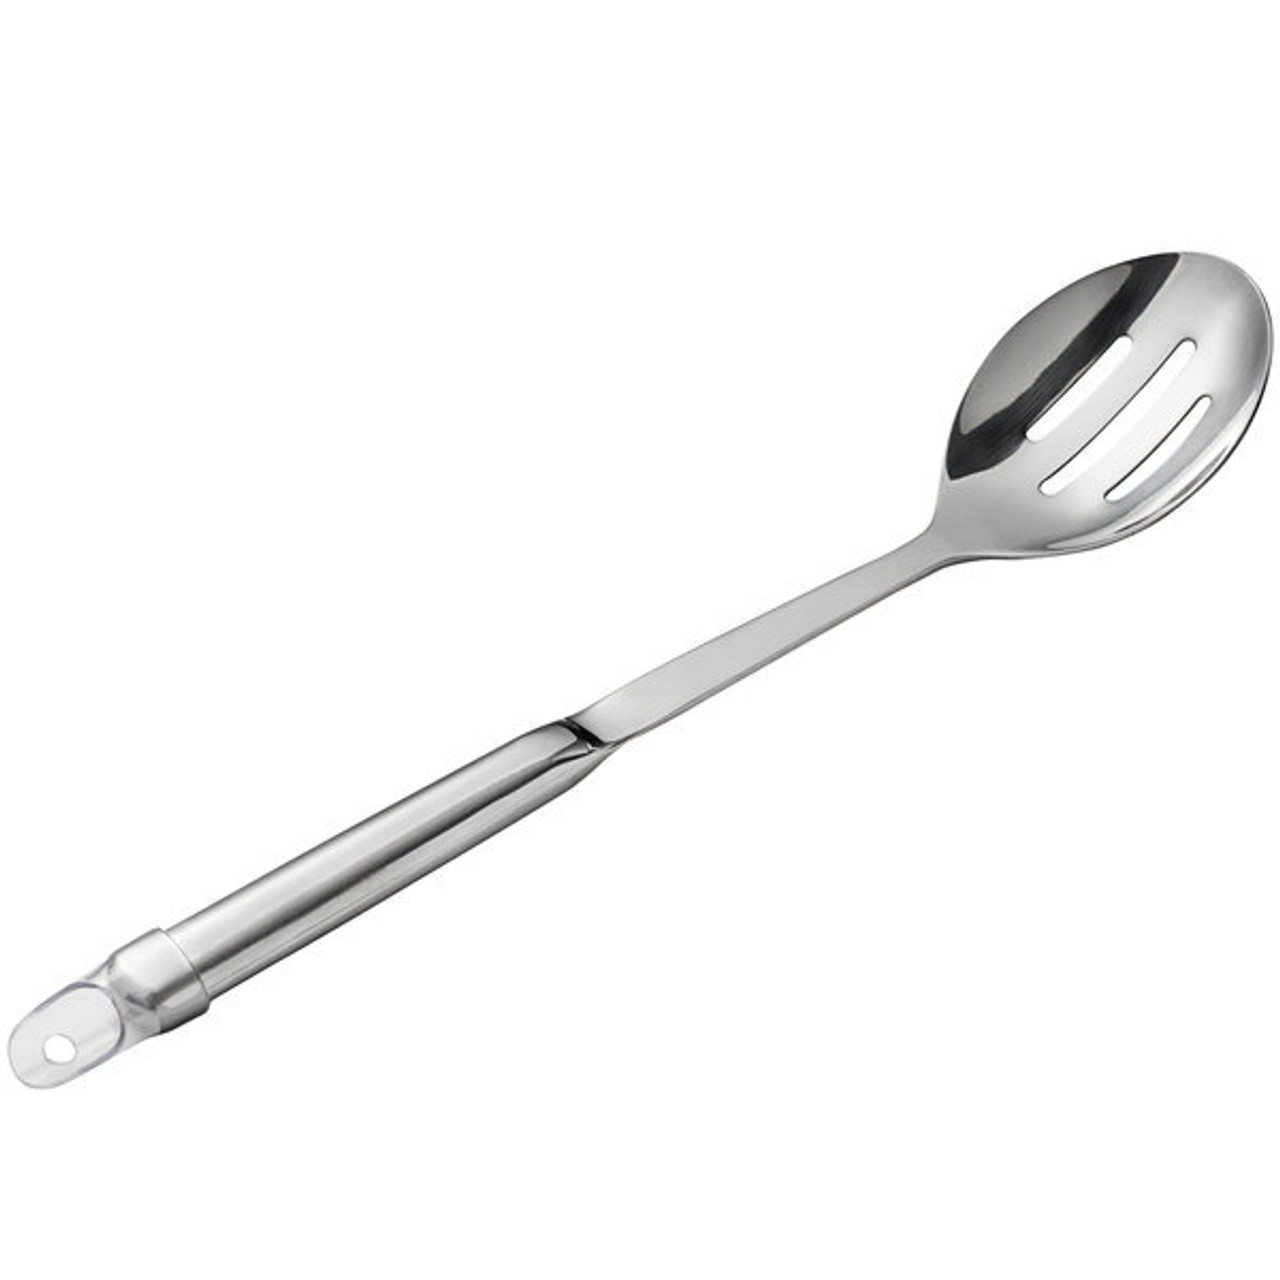 Hollow Stainless Steel Handle Slotted Serving Spoon